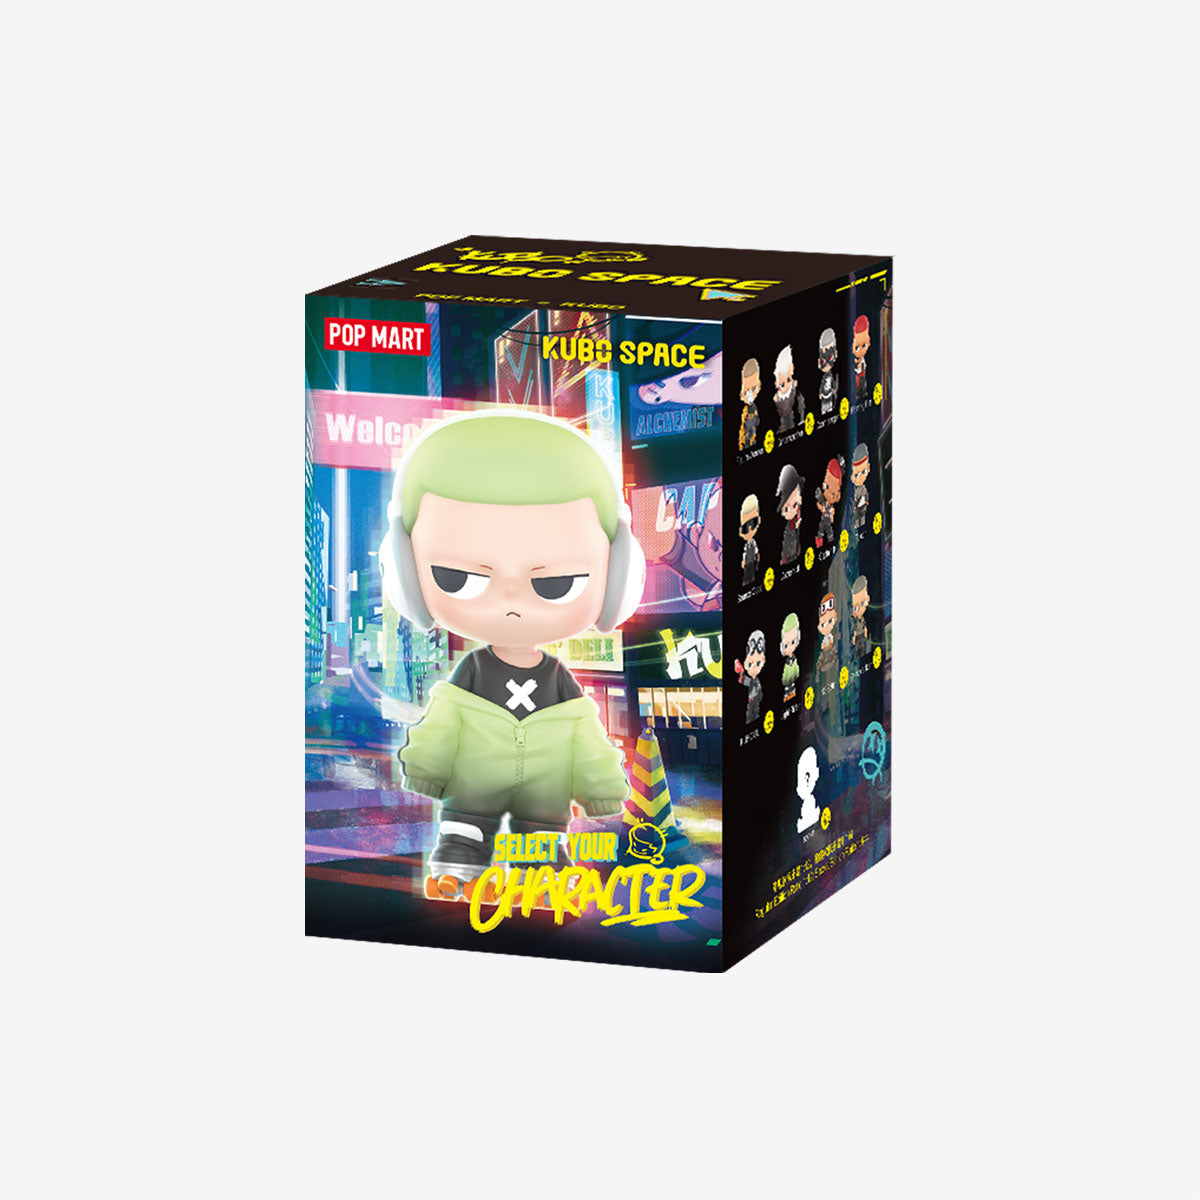 【New】Pop Mart: KUBO Select Your Character Series Blind Box Figures